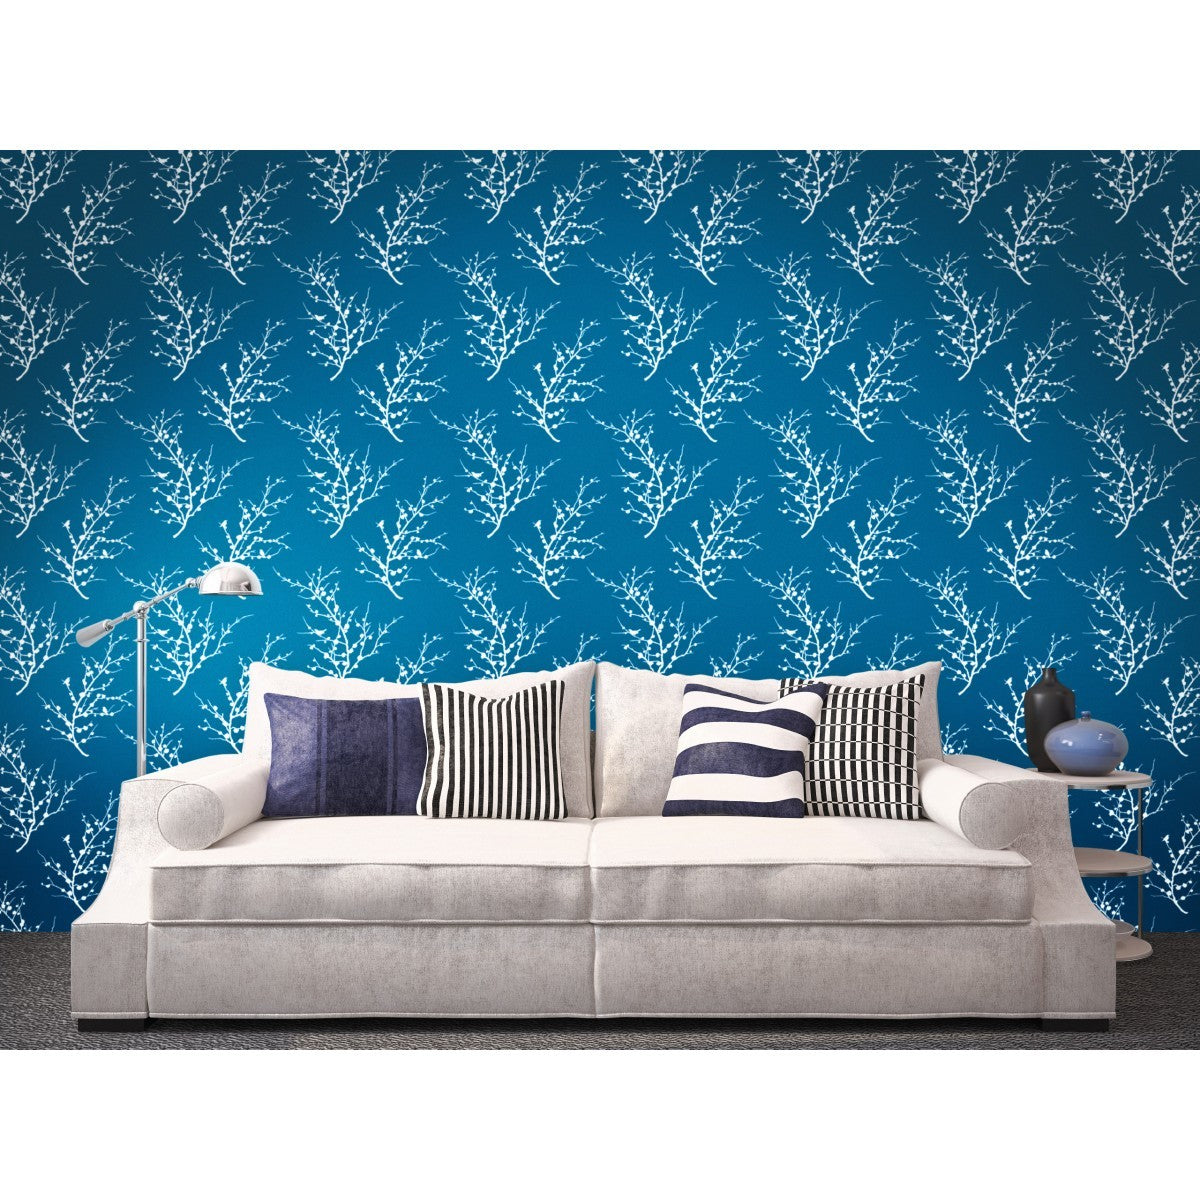 Frosted Teal ED018 Edie Self-Adhesive Wallpaper